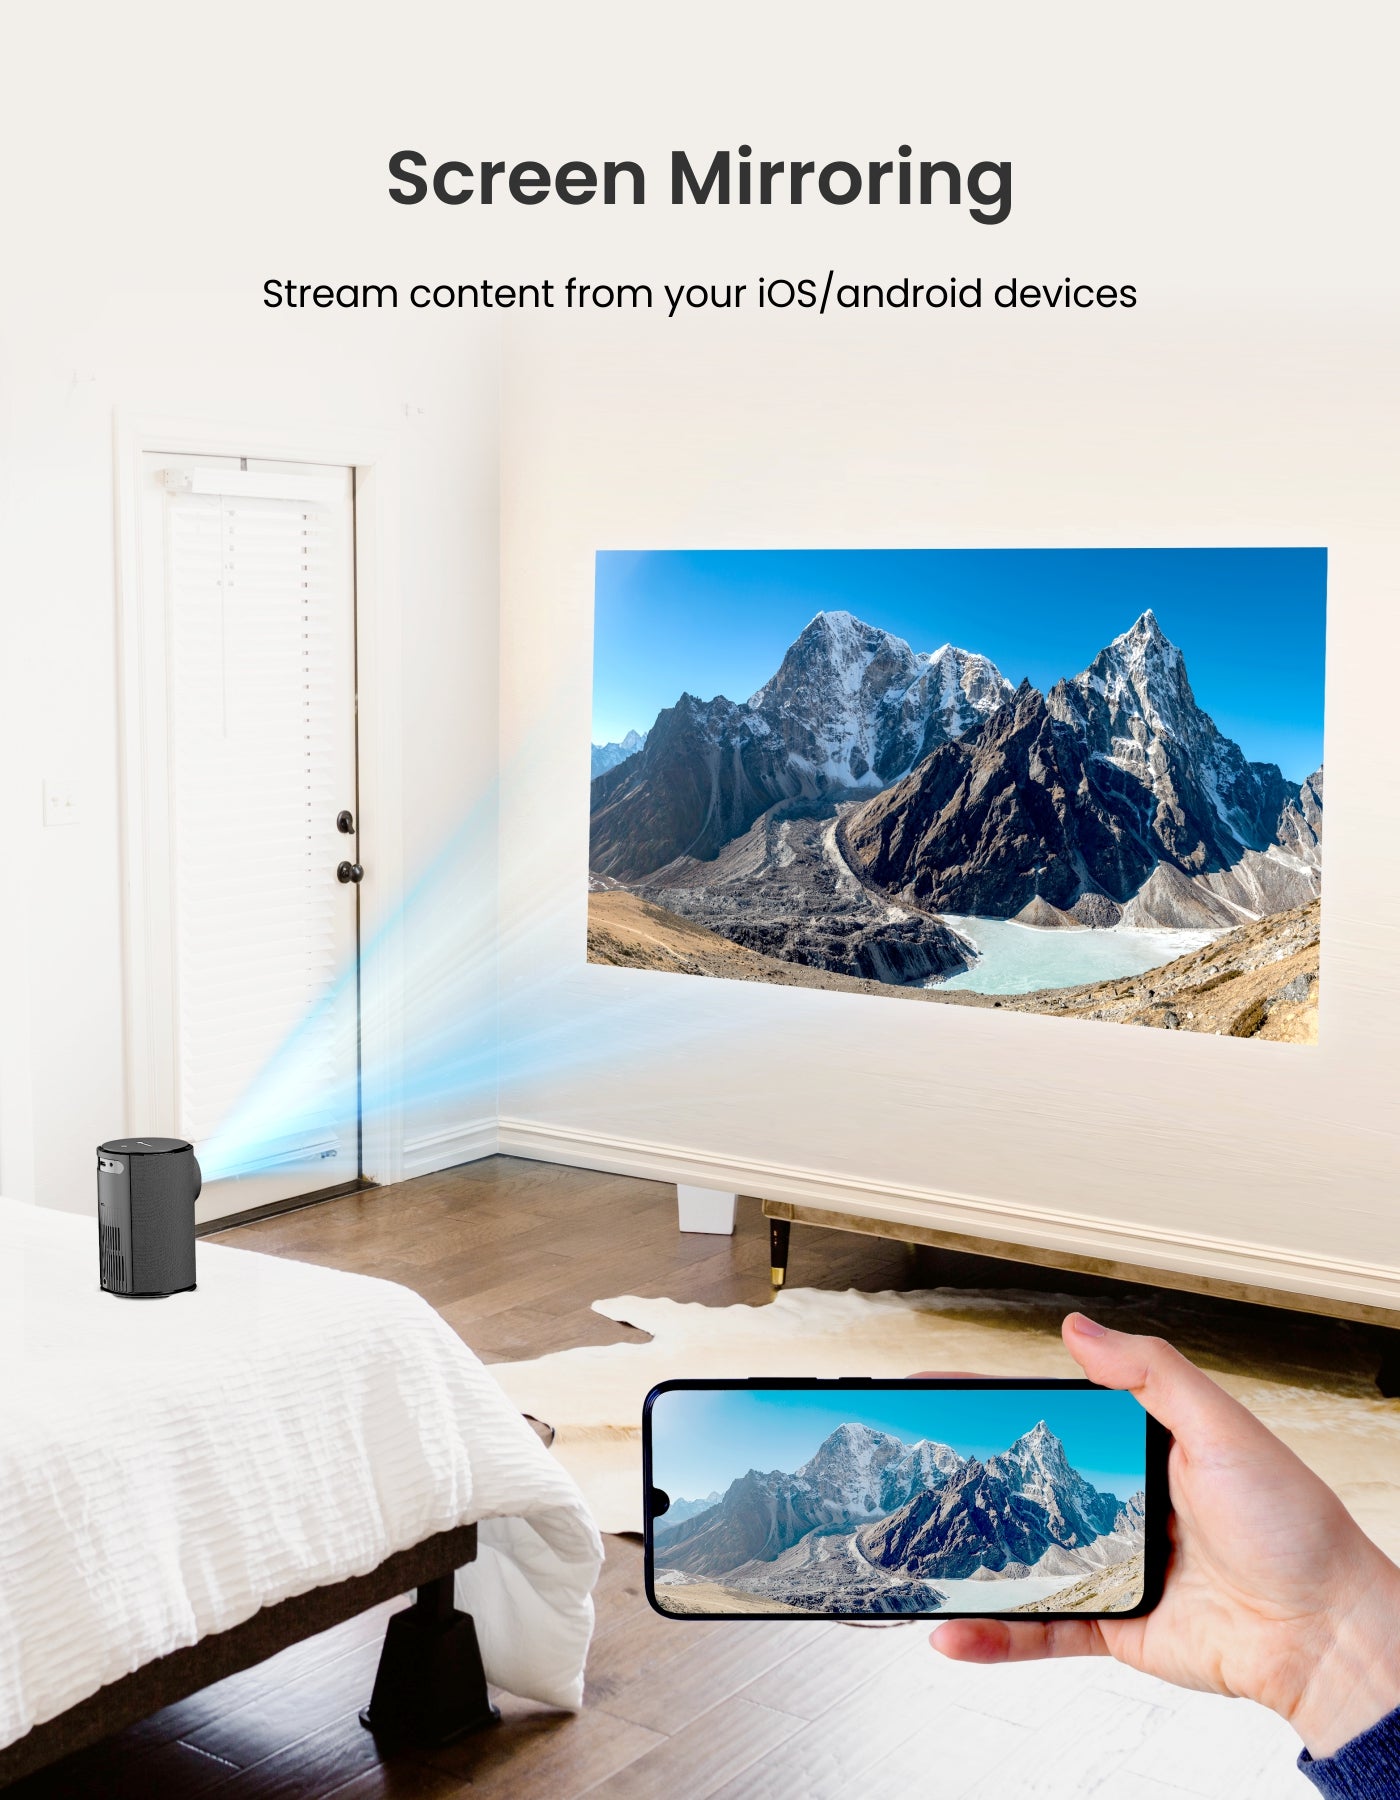 Portronics Beem 410 Wifi Bluetooth projector at affordable rate| portable projector with screen mirroring